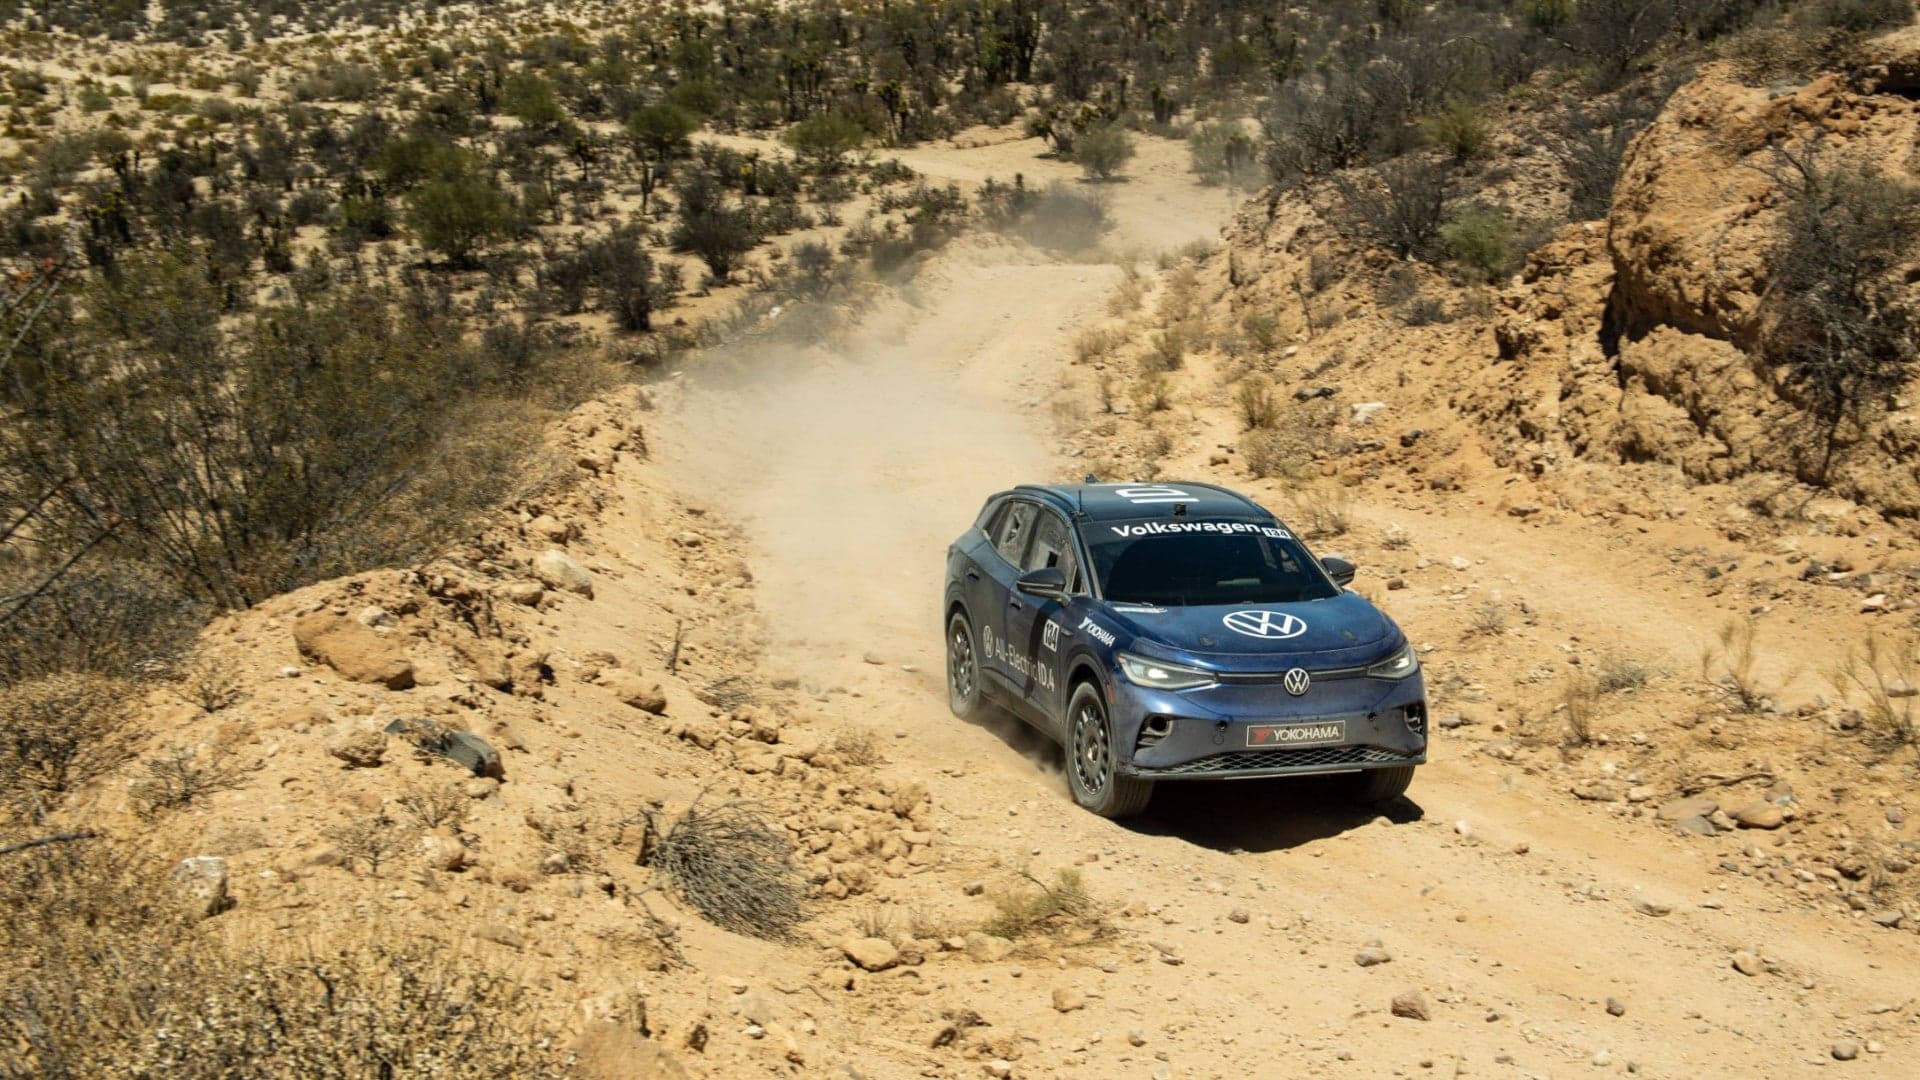 Volkswagen ID.4 Becomes First Production-Based EV To Complete the NORRA Mexican 1000